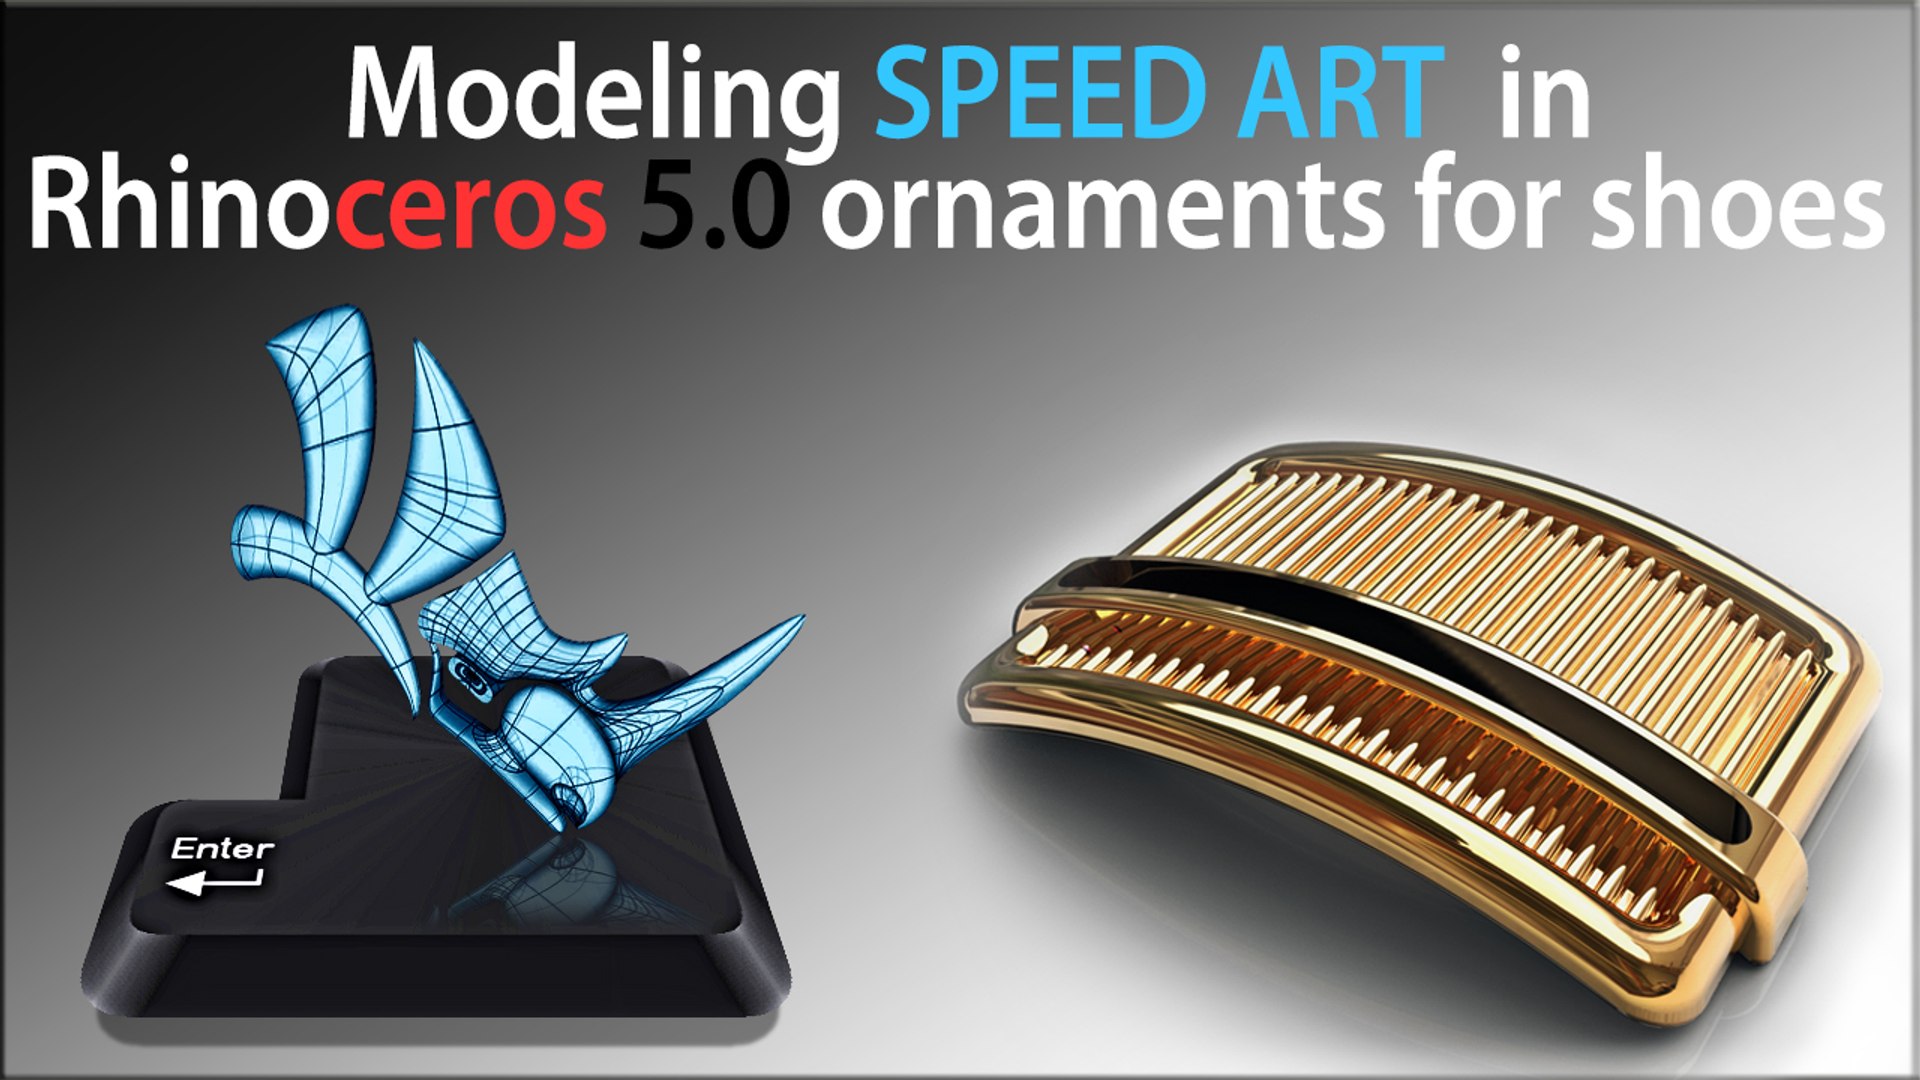 Rhinoceros 5.0 . Modeling  SPEED ART ornaments for shoes